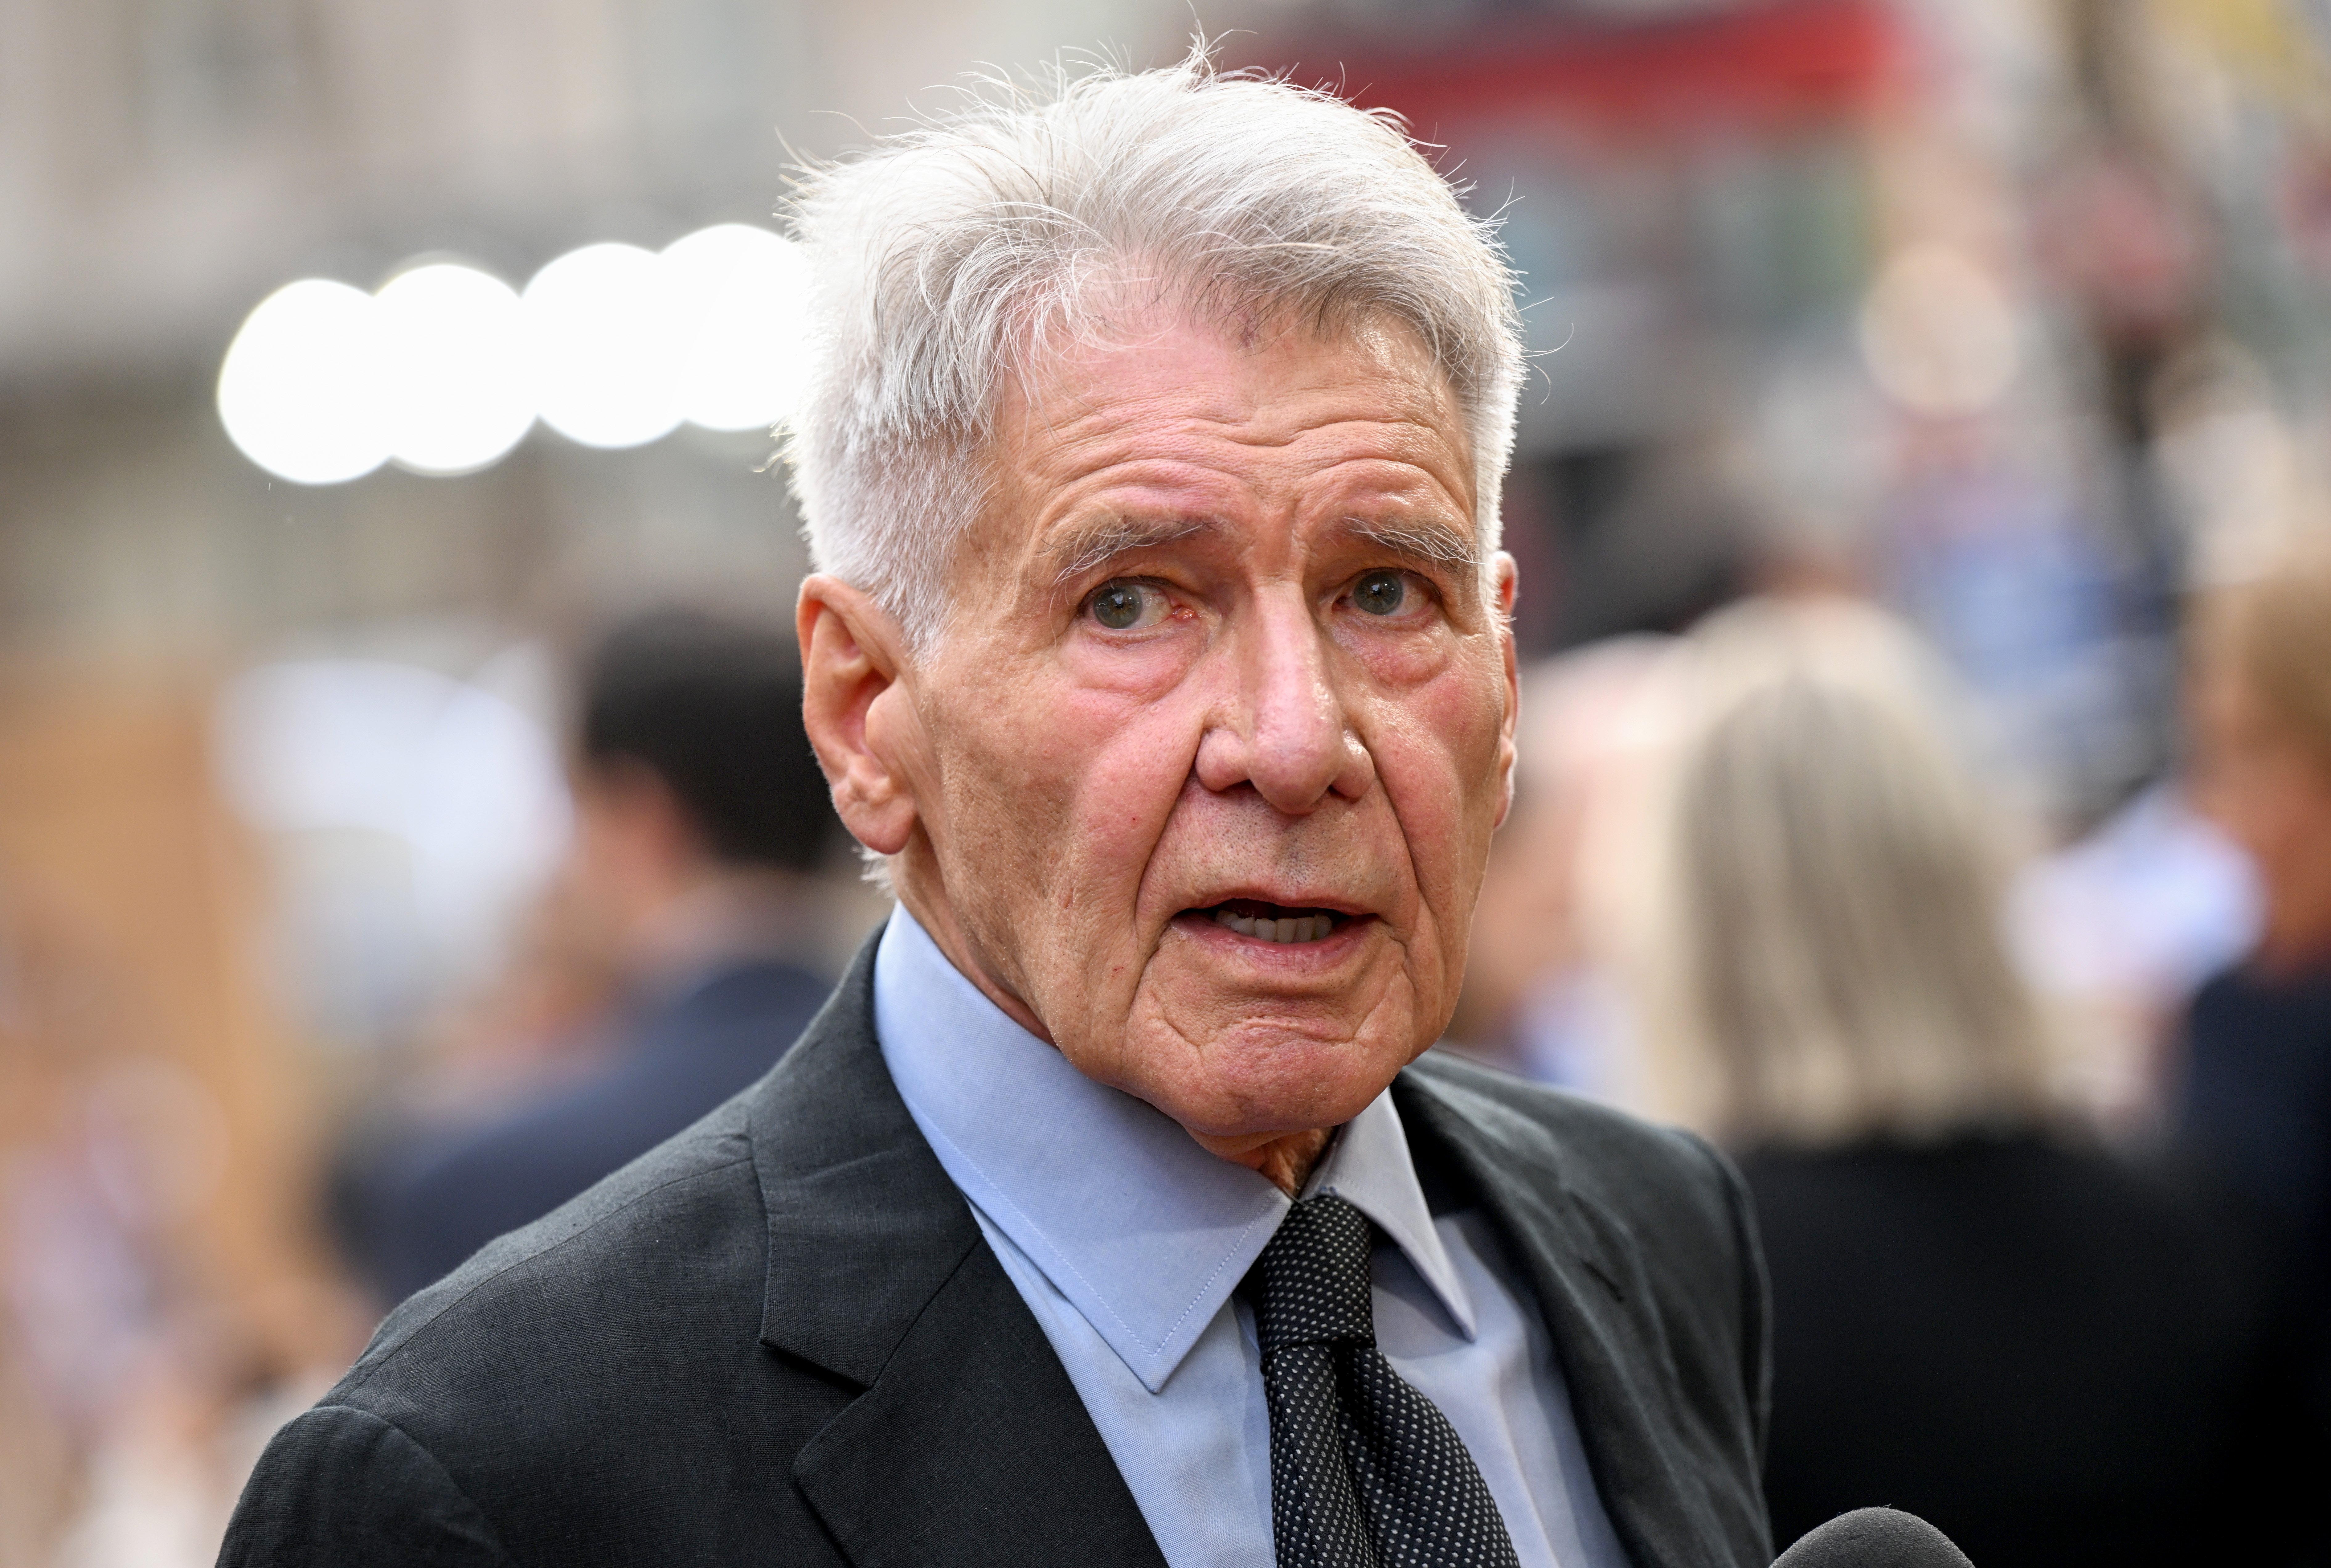 Harrison Ford at the premiere of "Indiana Jones and the Dial of Destiny" in London, England on June 26, 2023 | Source: Getty Images